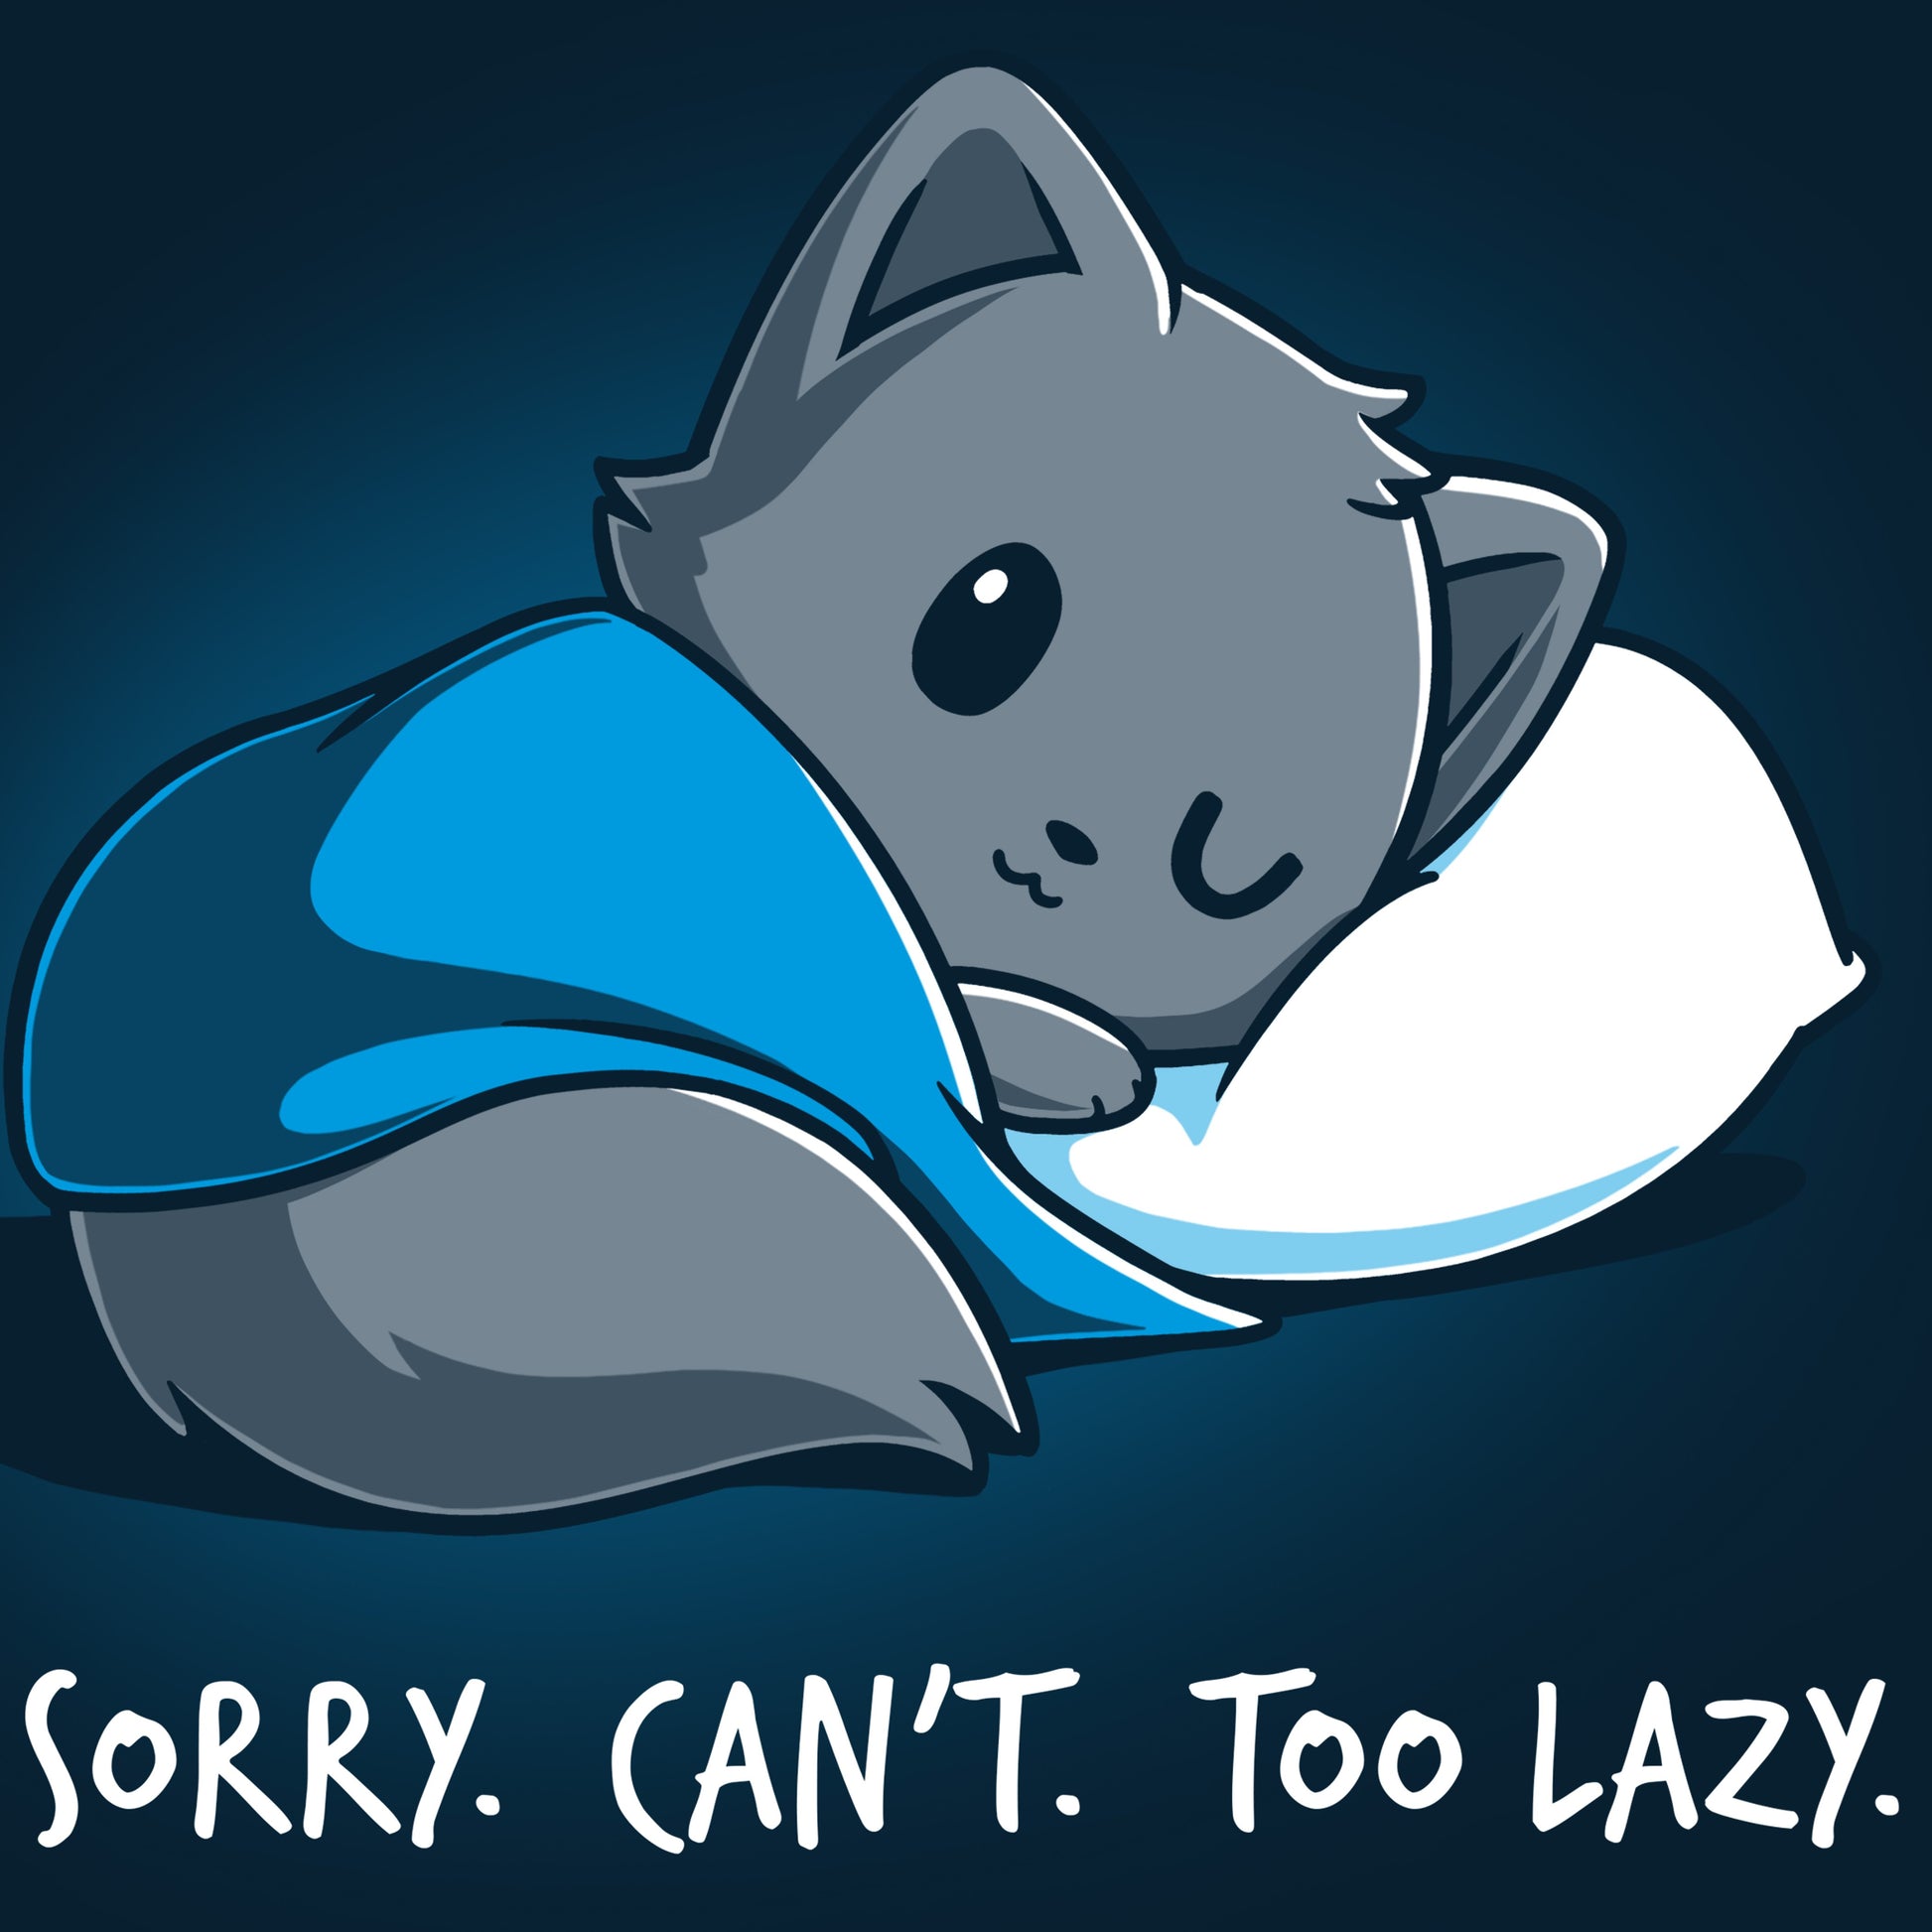 Sorry, too lazy to make t-shirt.